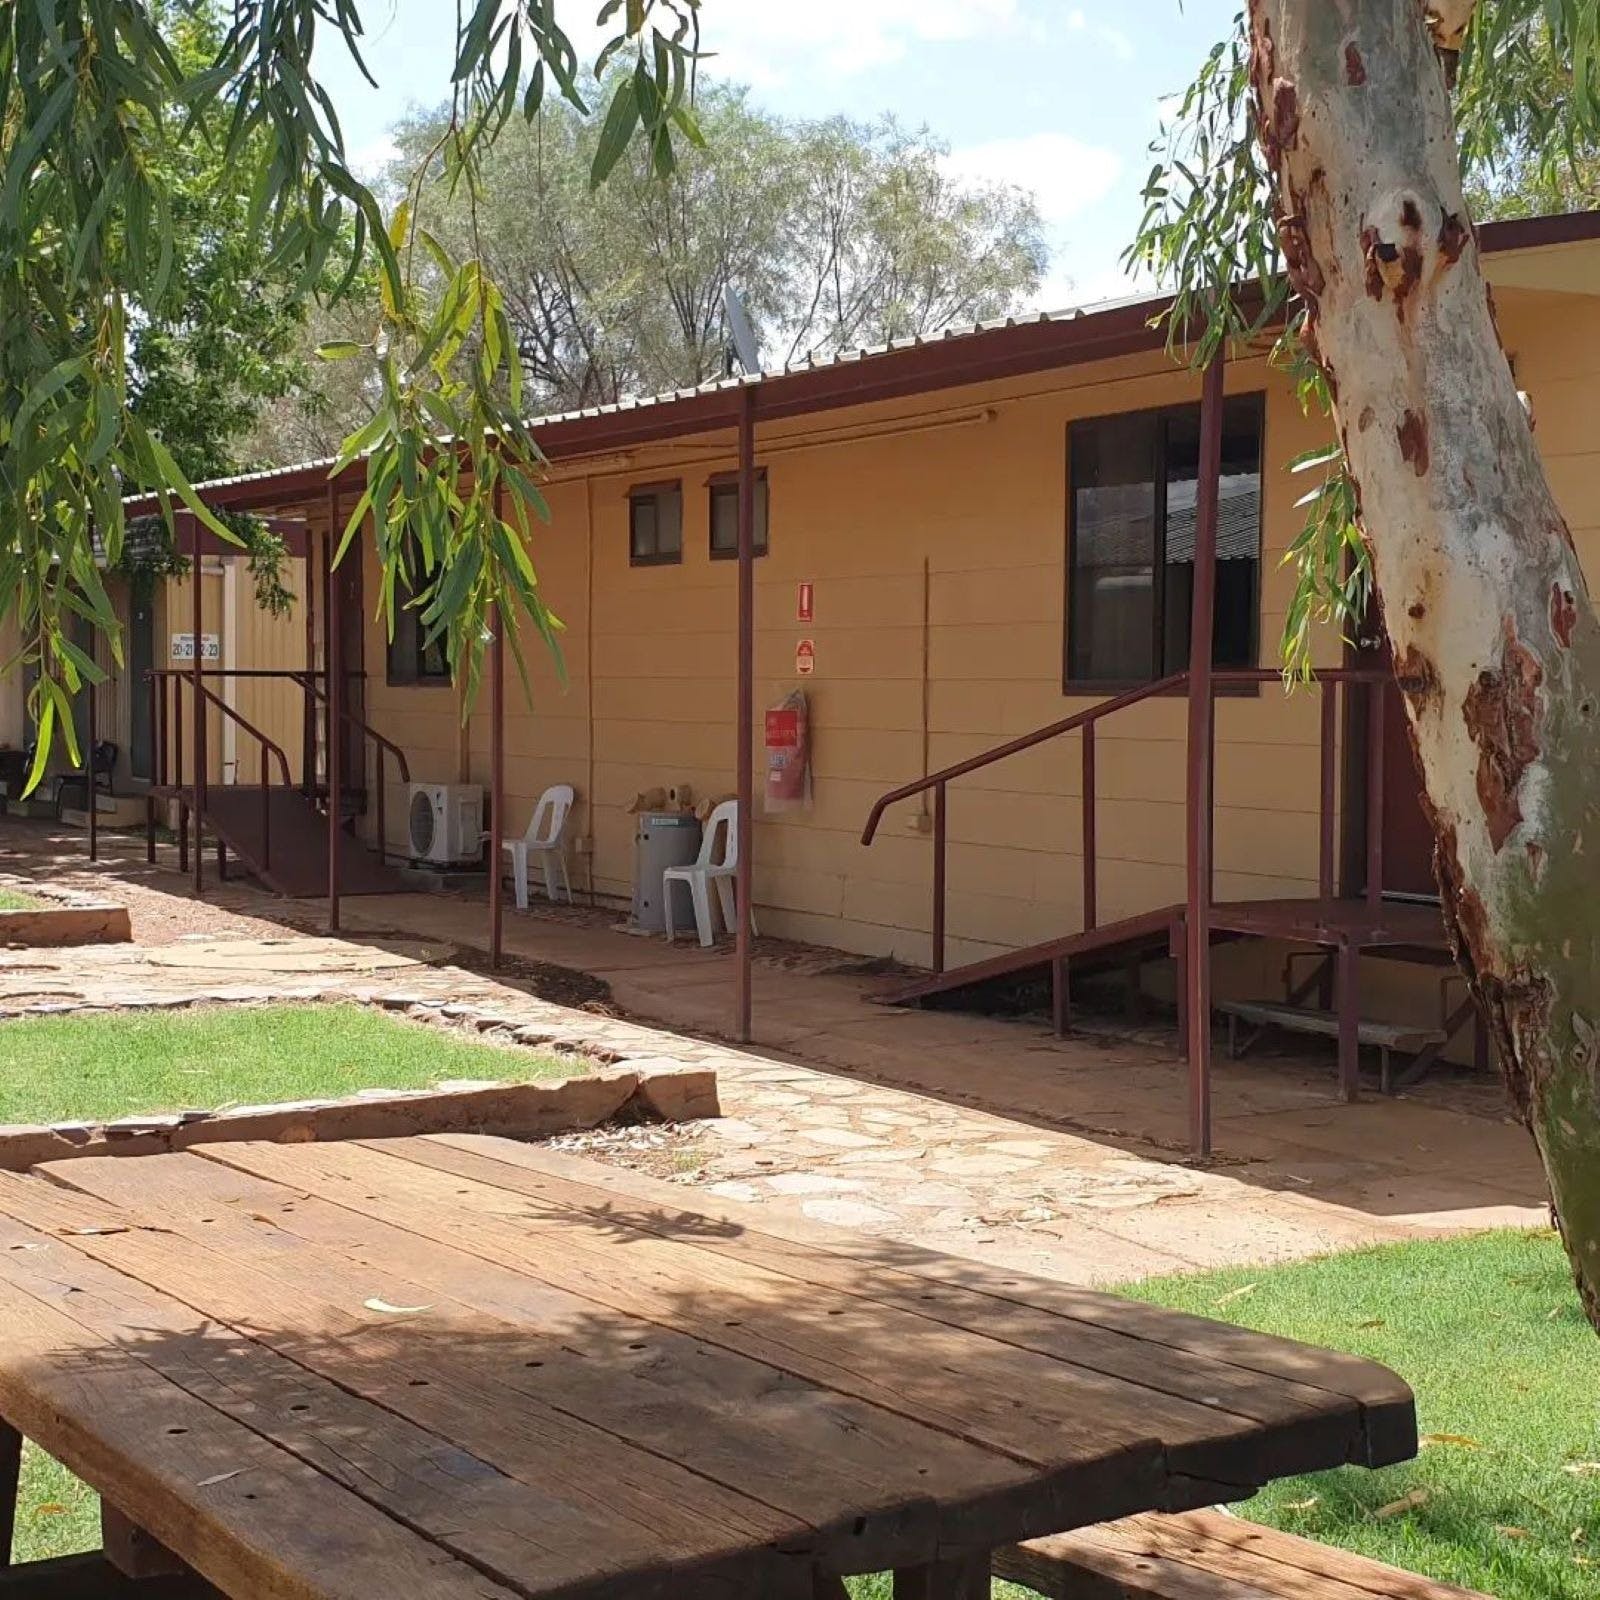 travellers rest accommodation